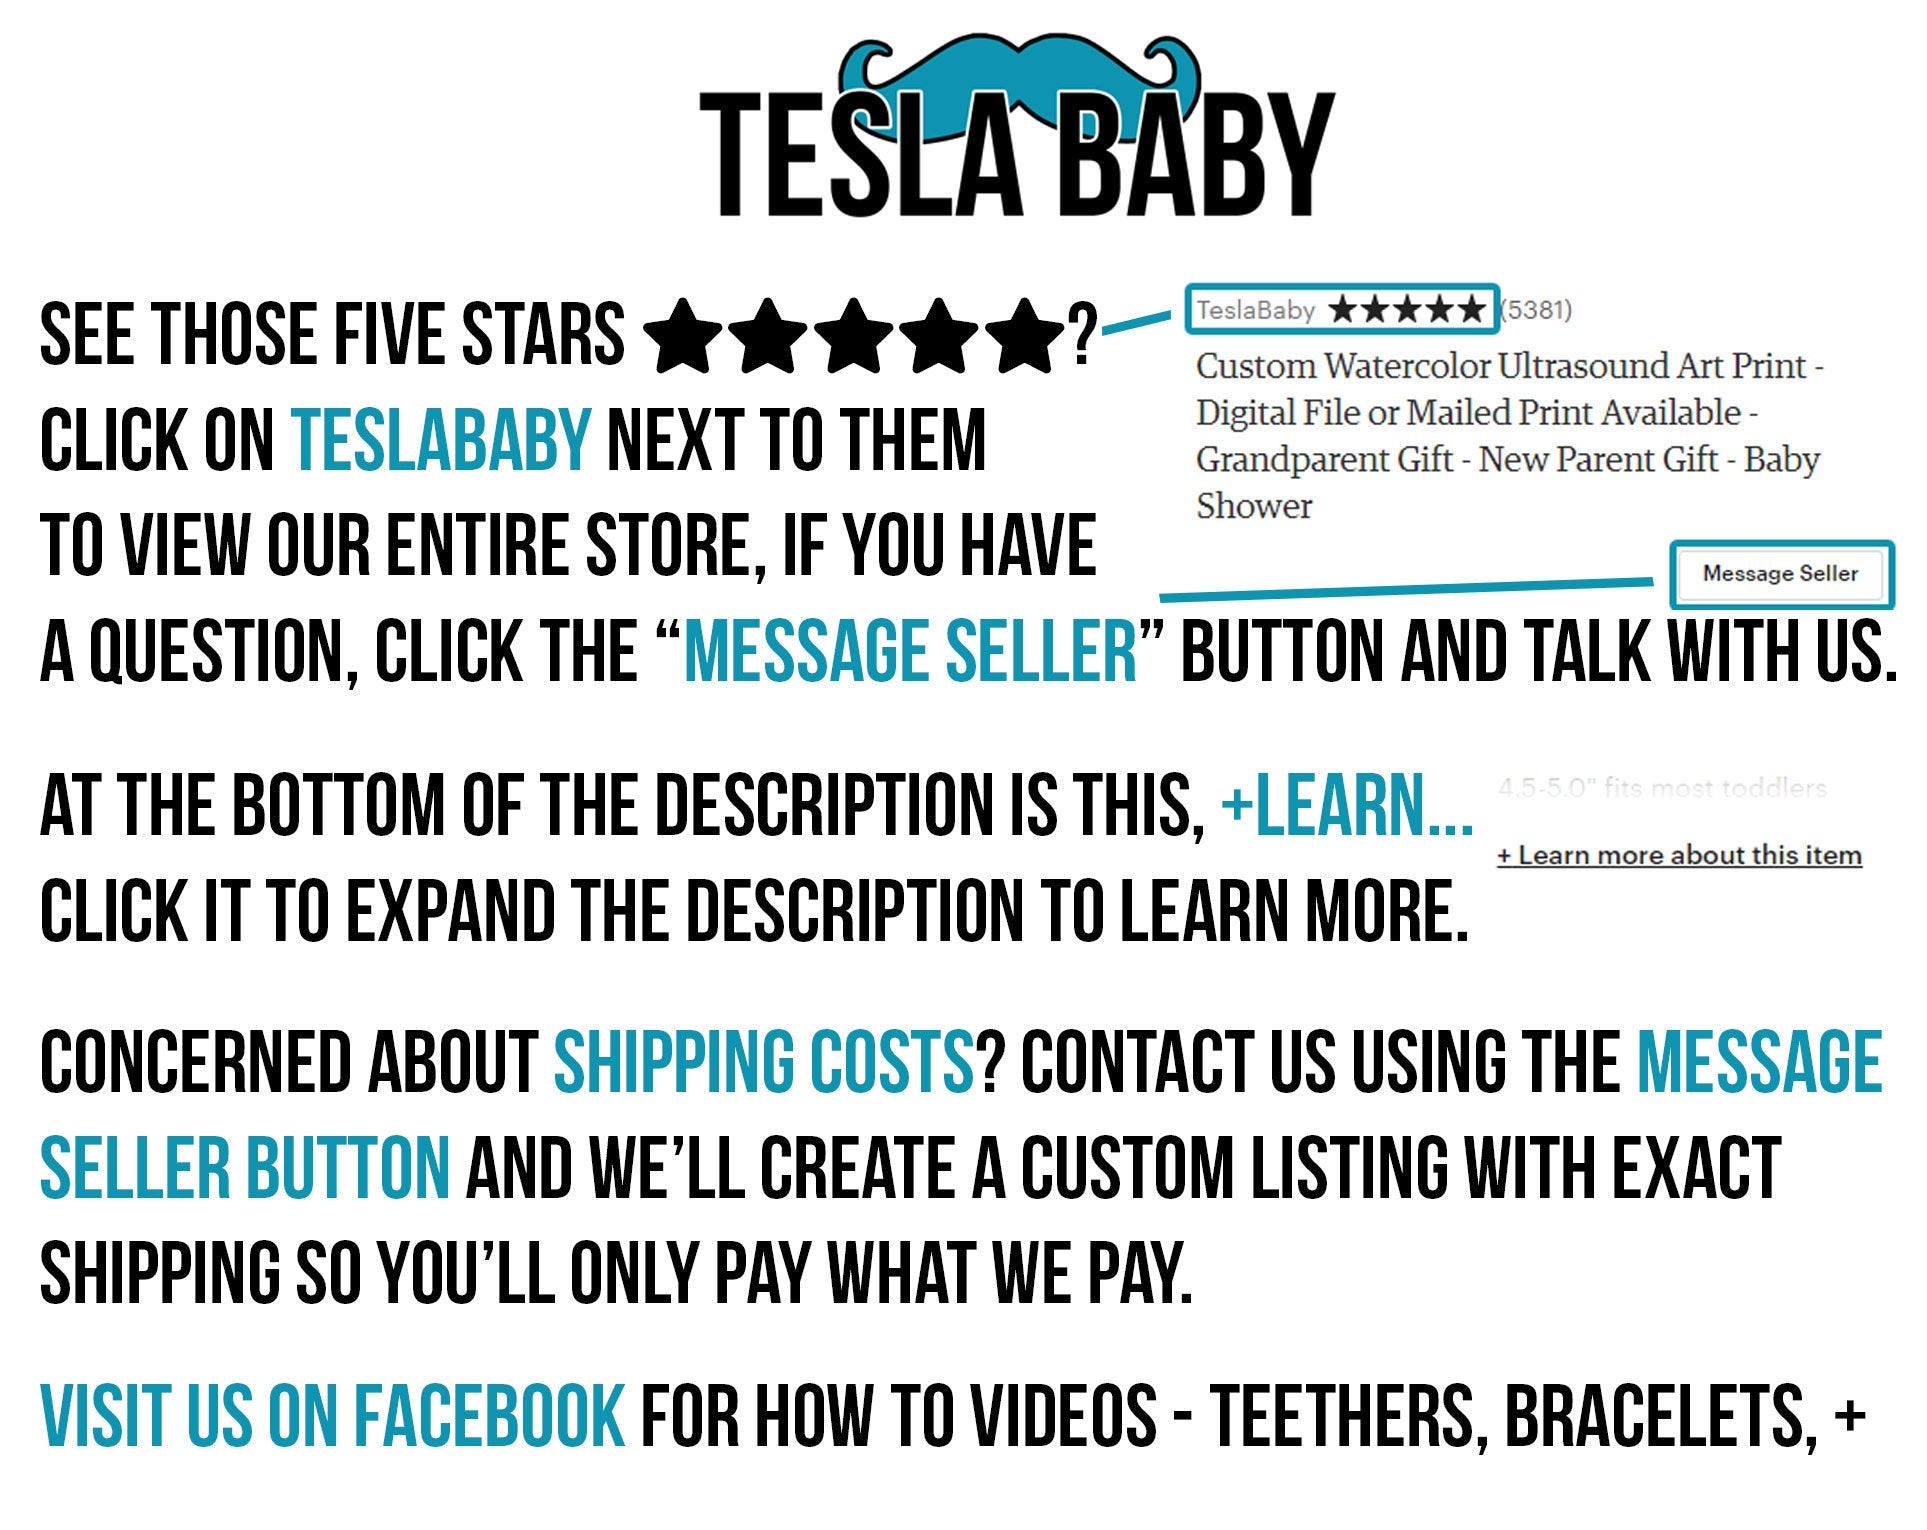 1 Silicone Gingerbread Teether / Pendant in Teal - Silicone Teething, Silicone Teether, Teething Pendant